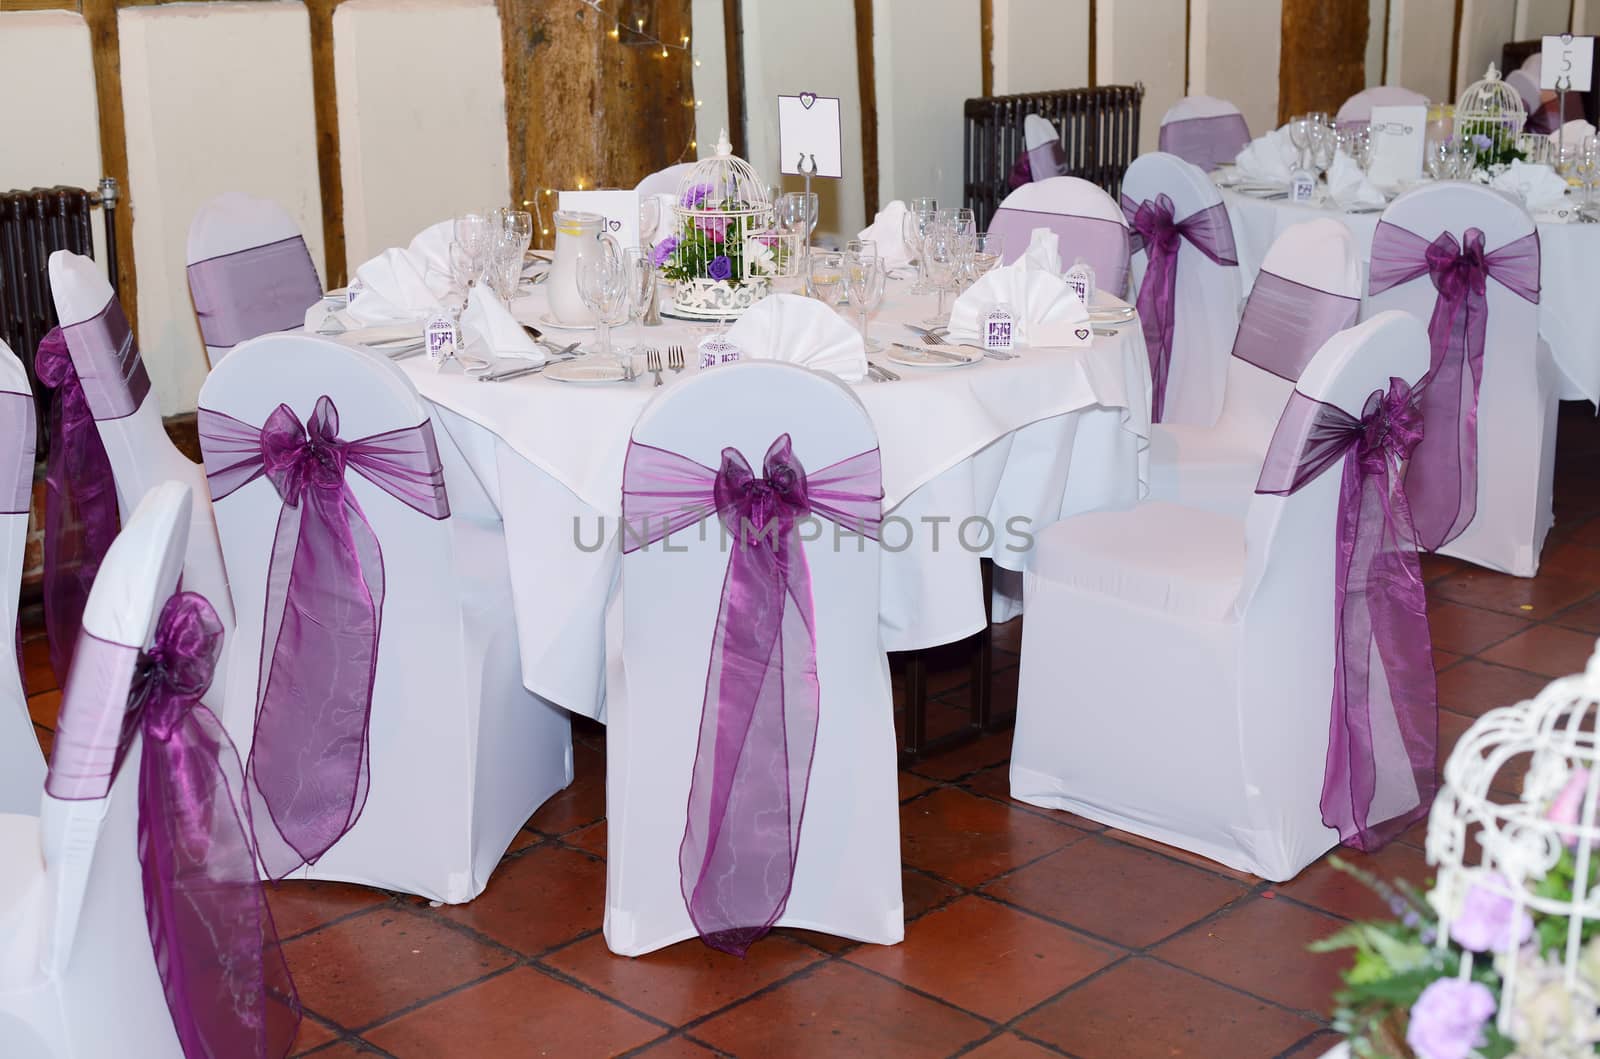 Chair and table cover at wedding by kmwphotography